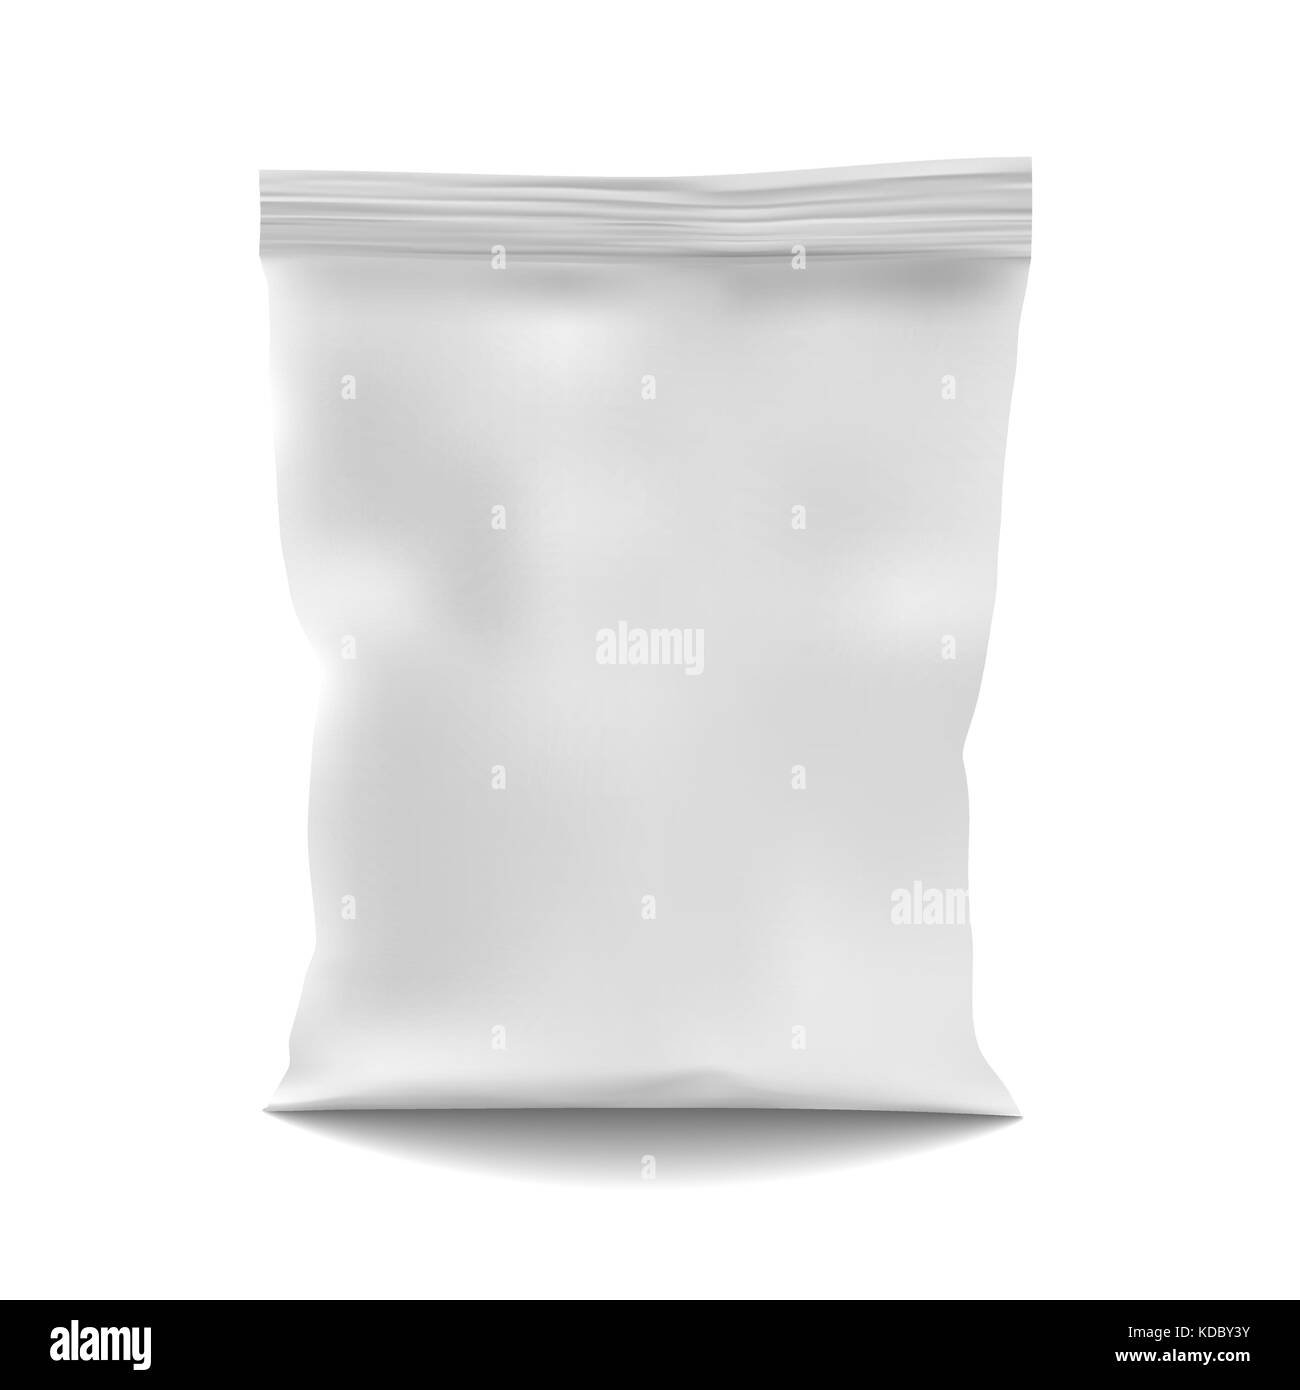 White Blank Foil Food Snack Sachet Bag Packaging For Coffee, Salt, Sugar, Pepper, Spices, Sachet, Sweets, Chips, Cookies. Illustration Isolated. Mock  Stock Vector